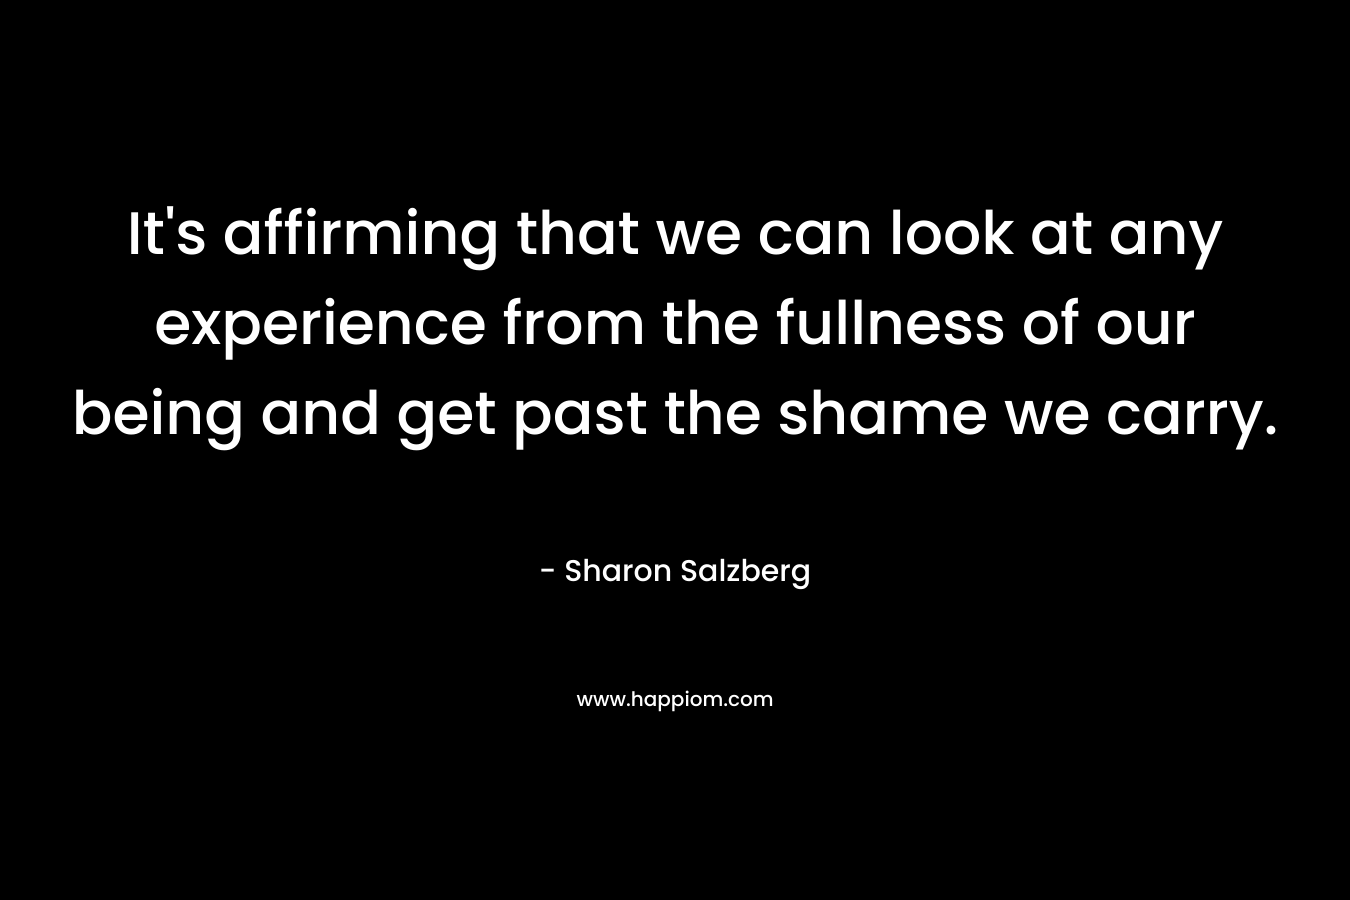 It's affirming that we can look at any experience from the fullness of our being and get past the shame we carry.